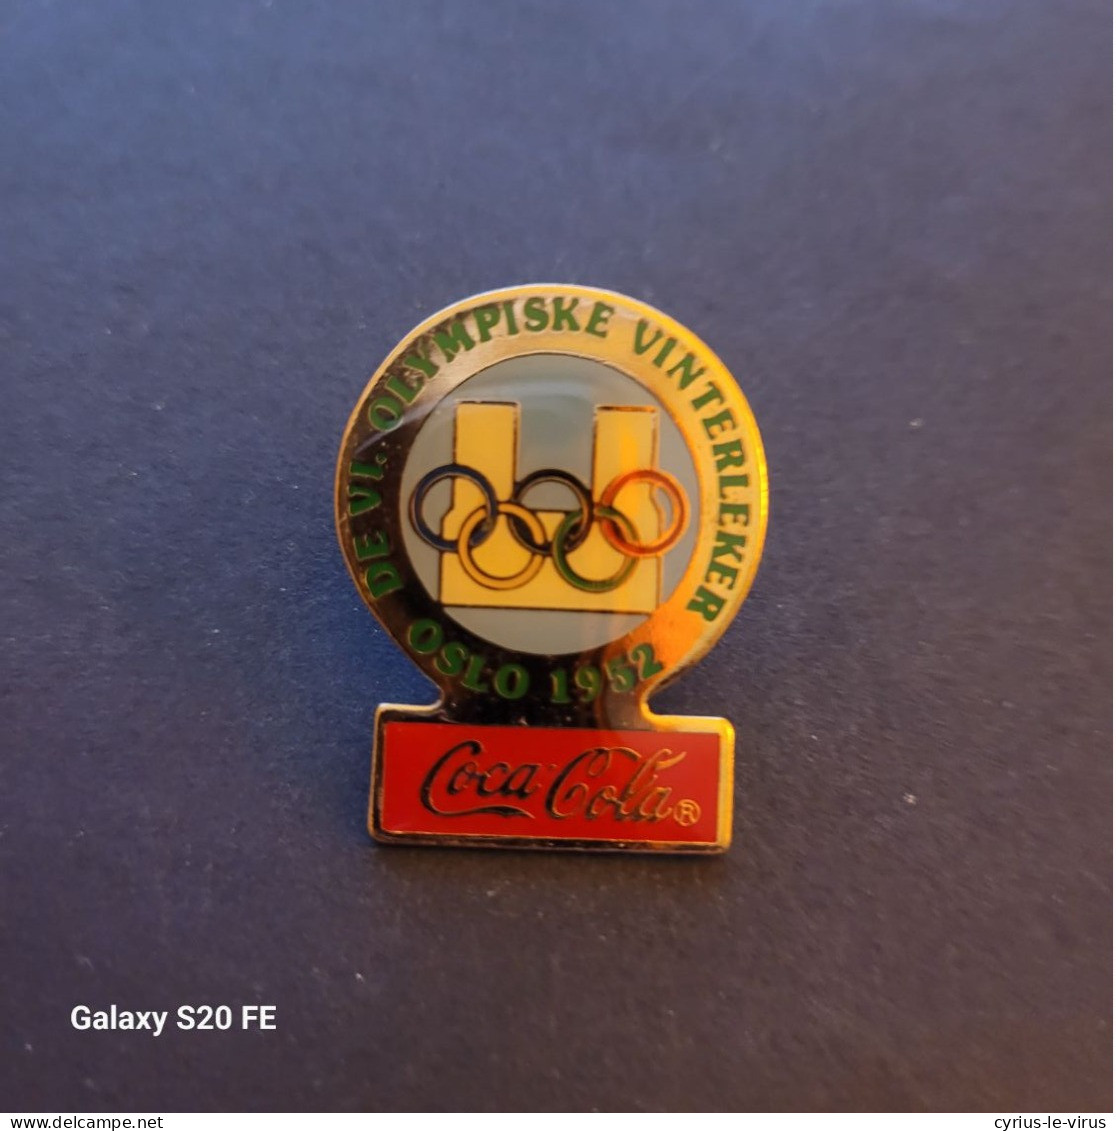 Pin's  **  Jeux Olympiques D'hiver ** Oslo 1952 - Jeux Olympiques